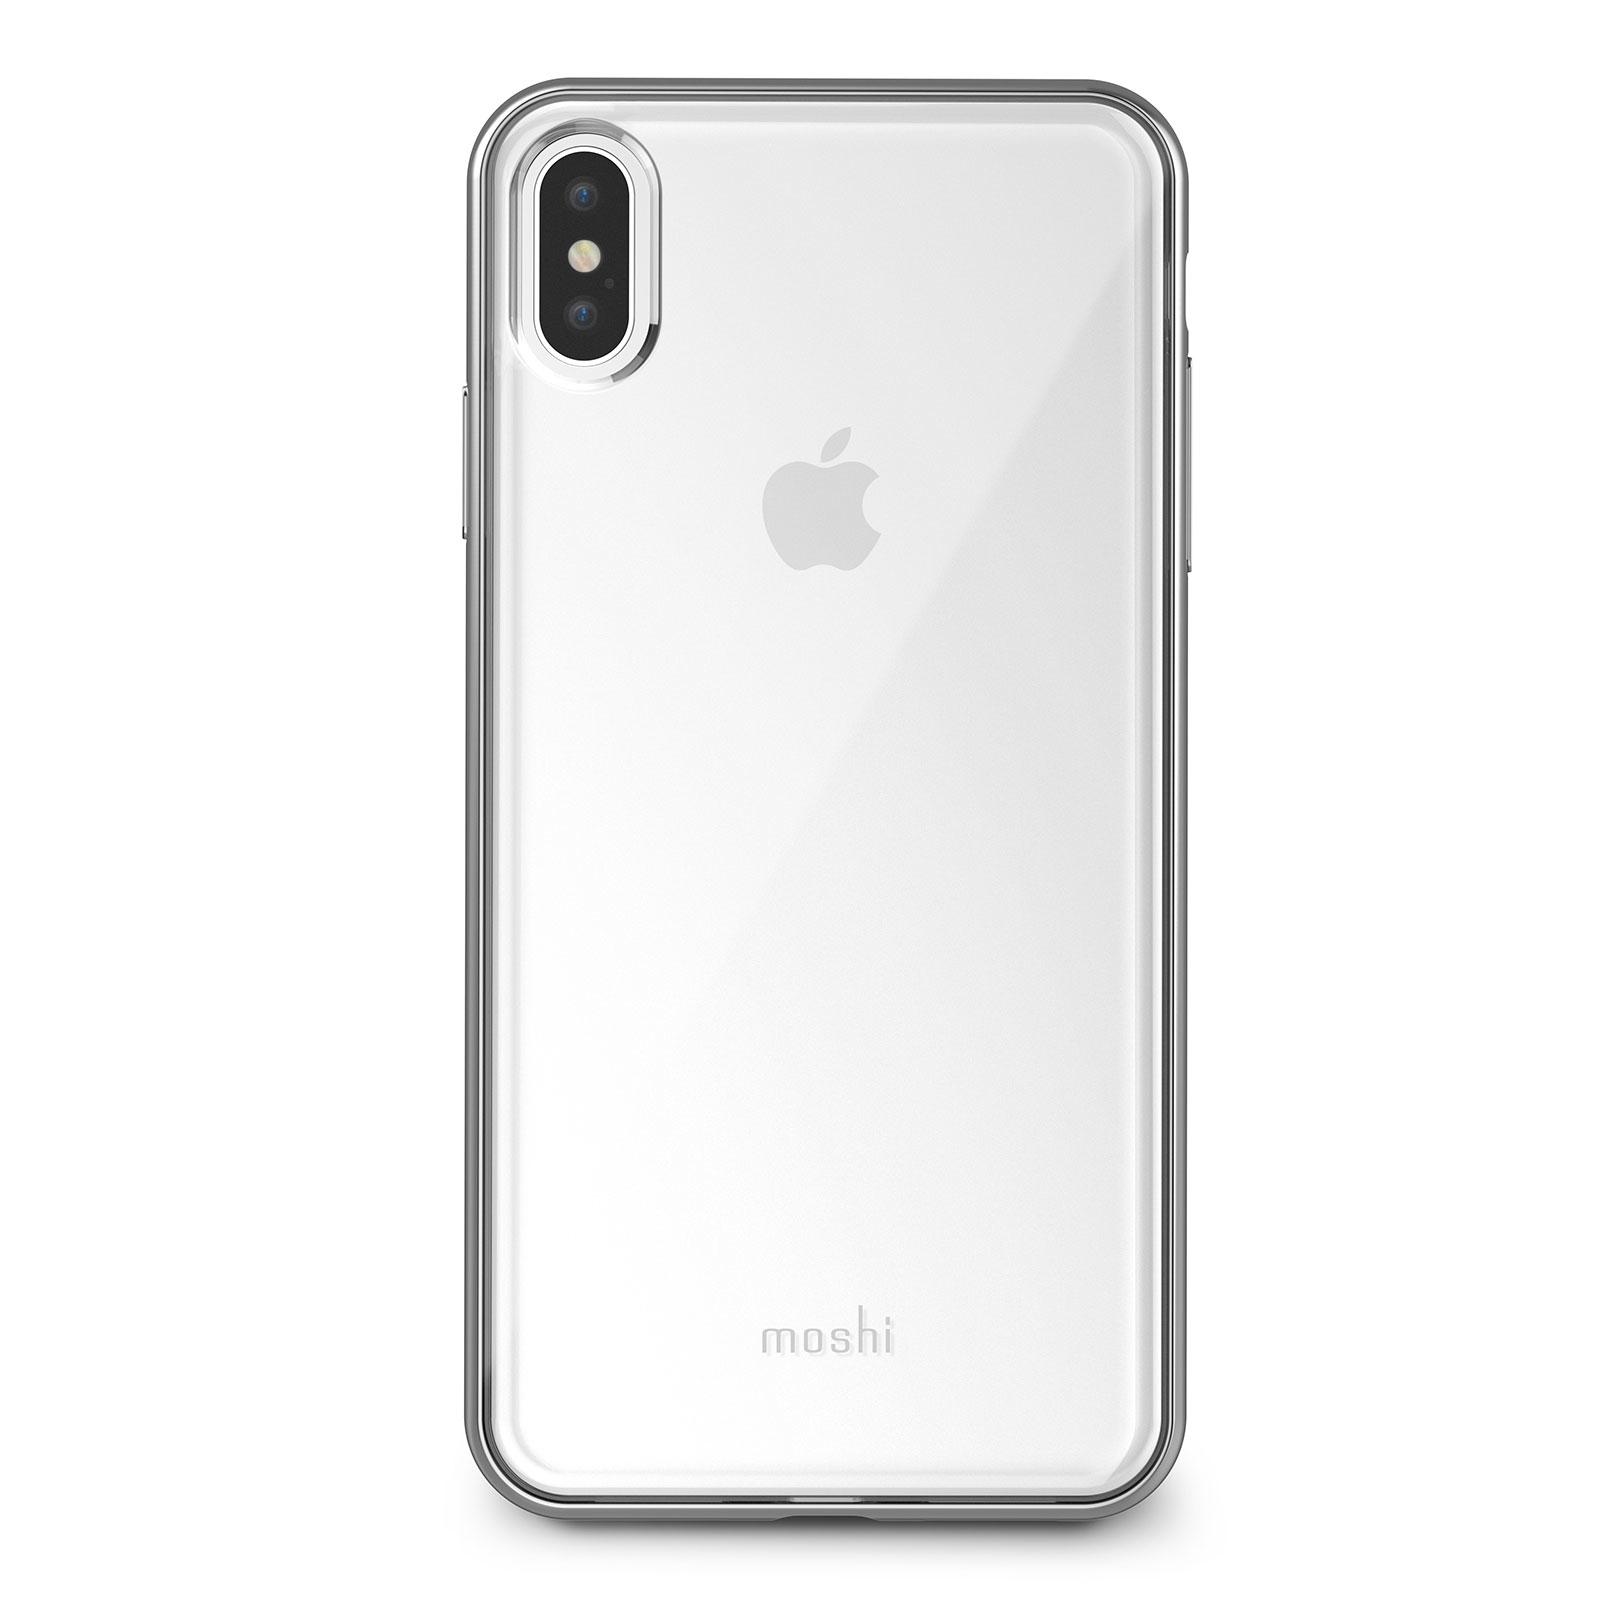 Moshi Vitros Case Jet Silver for iPhone XS Max